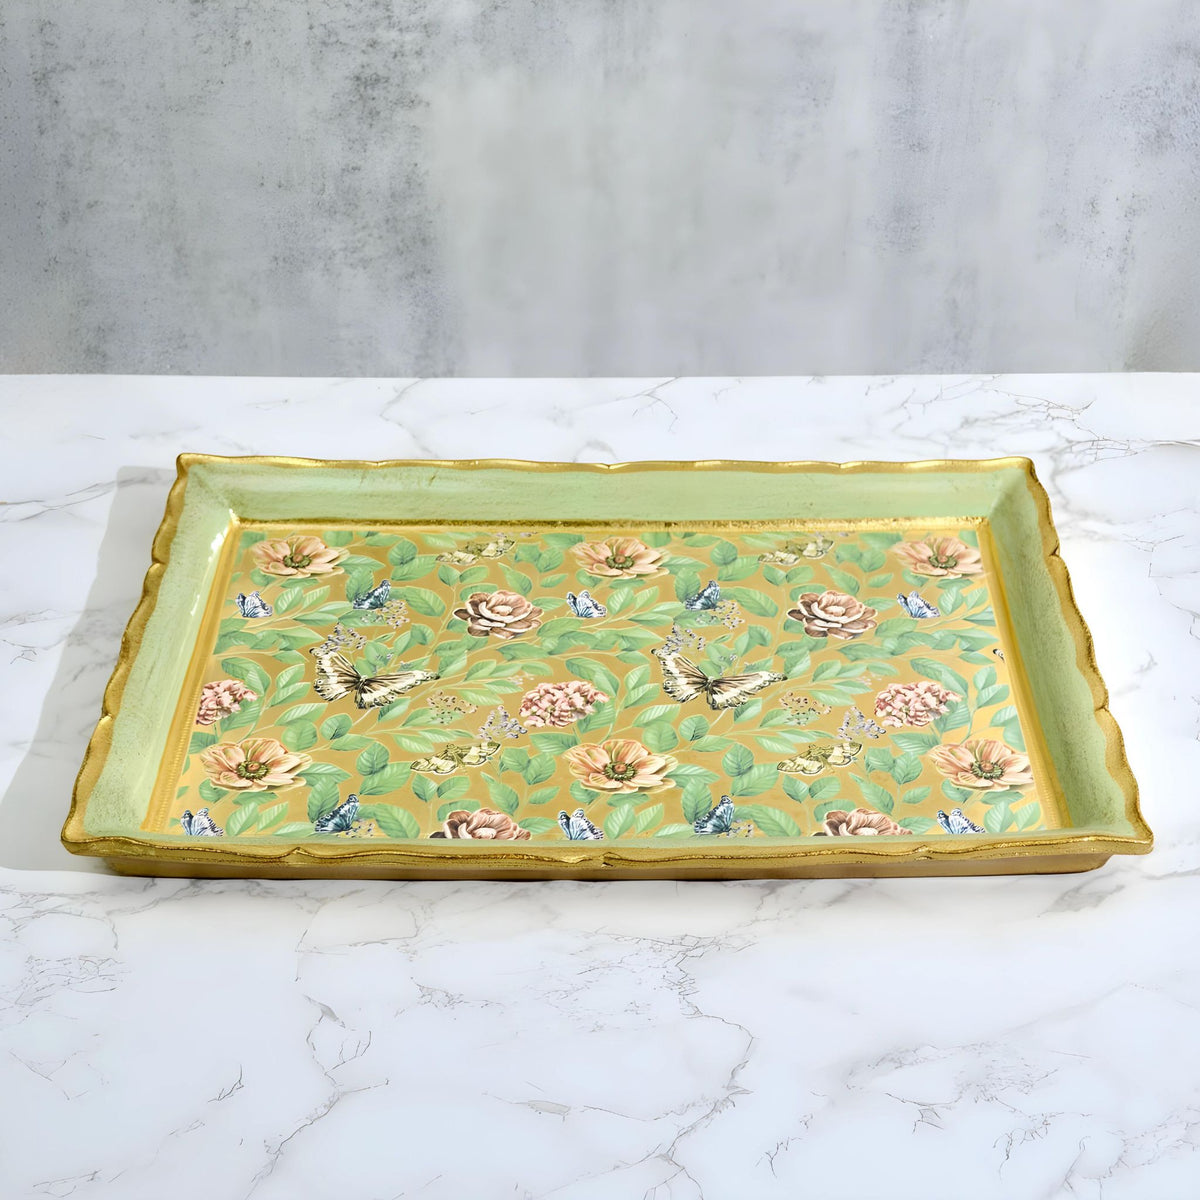 Florentine Carved Wood Decoupage Tray, Floral &amp; Butterflies - My Italian Decor